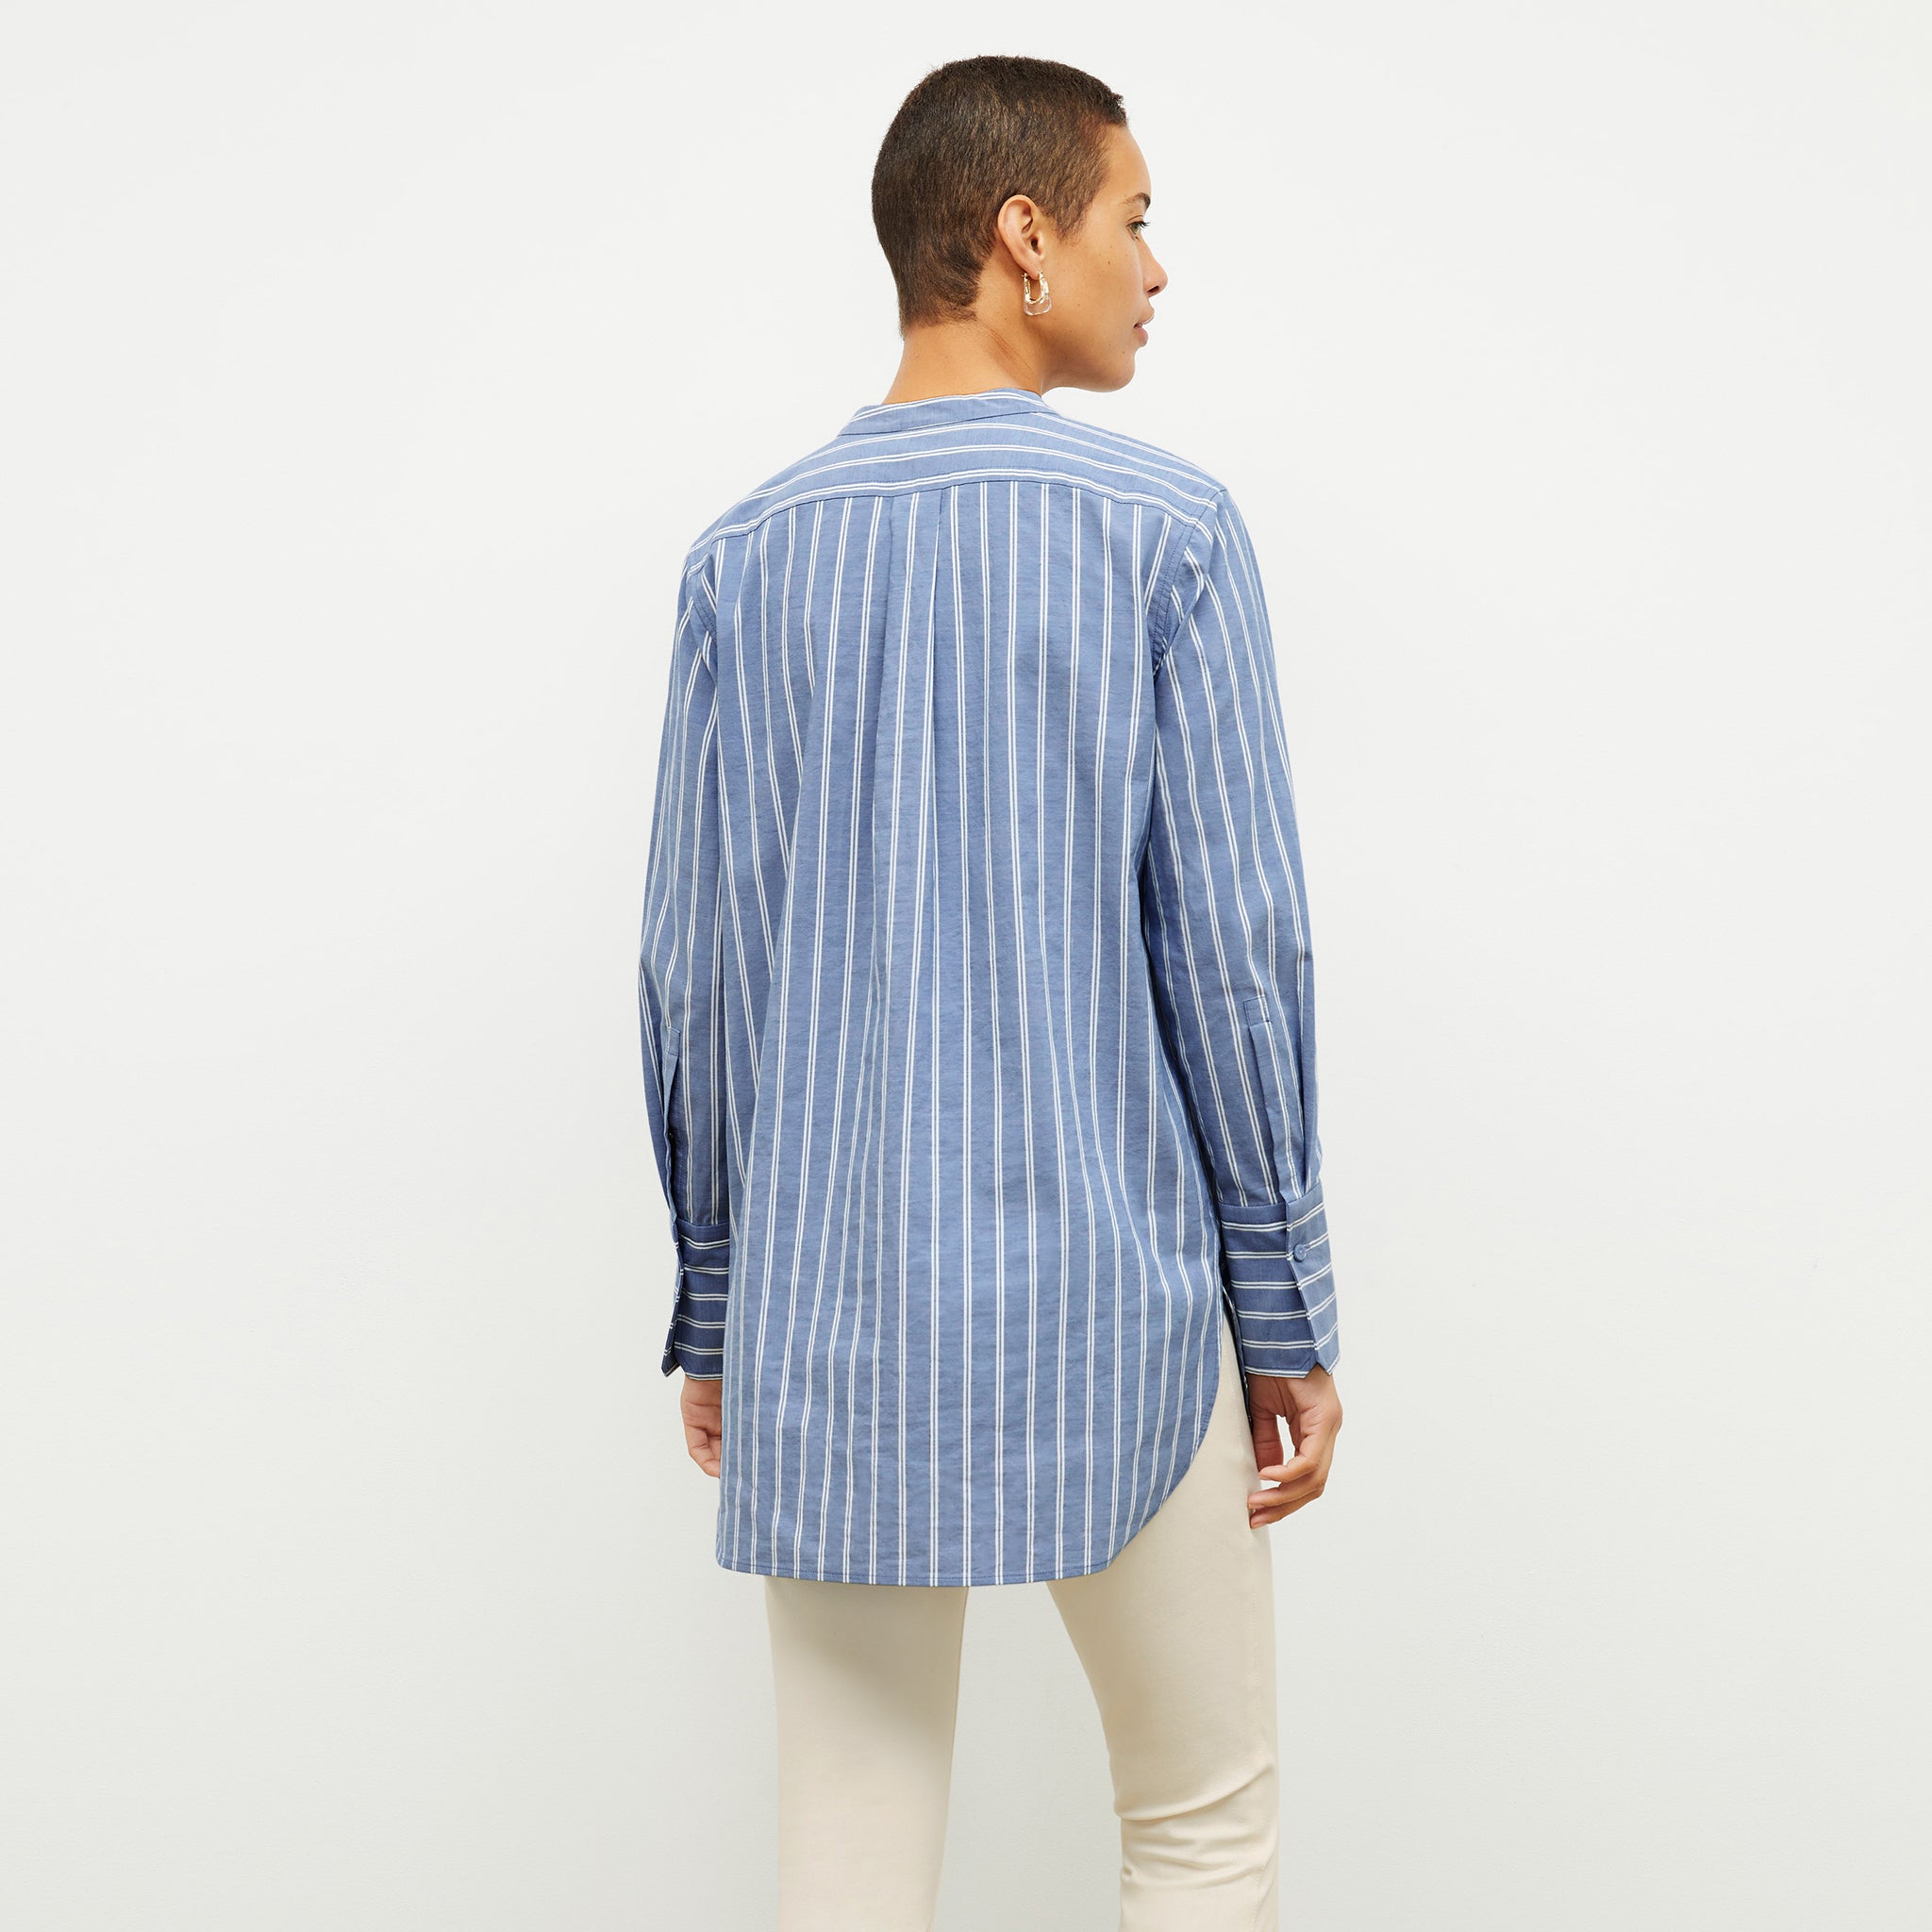 back image of a woman wearing the Nichols shirt in blue and white poplin stripe